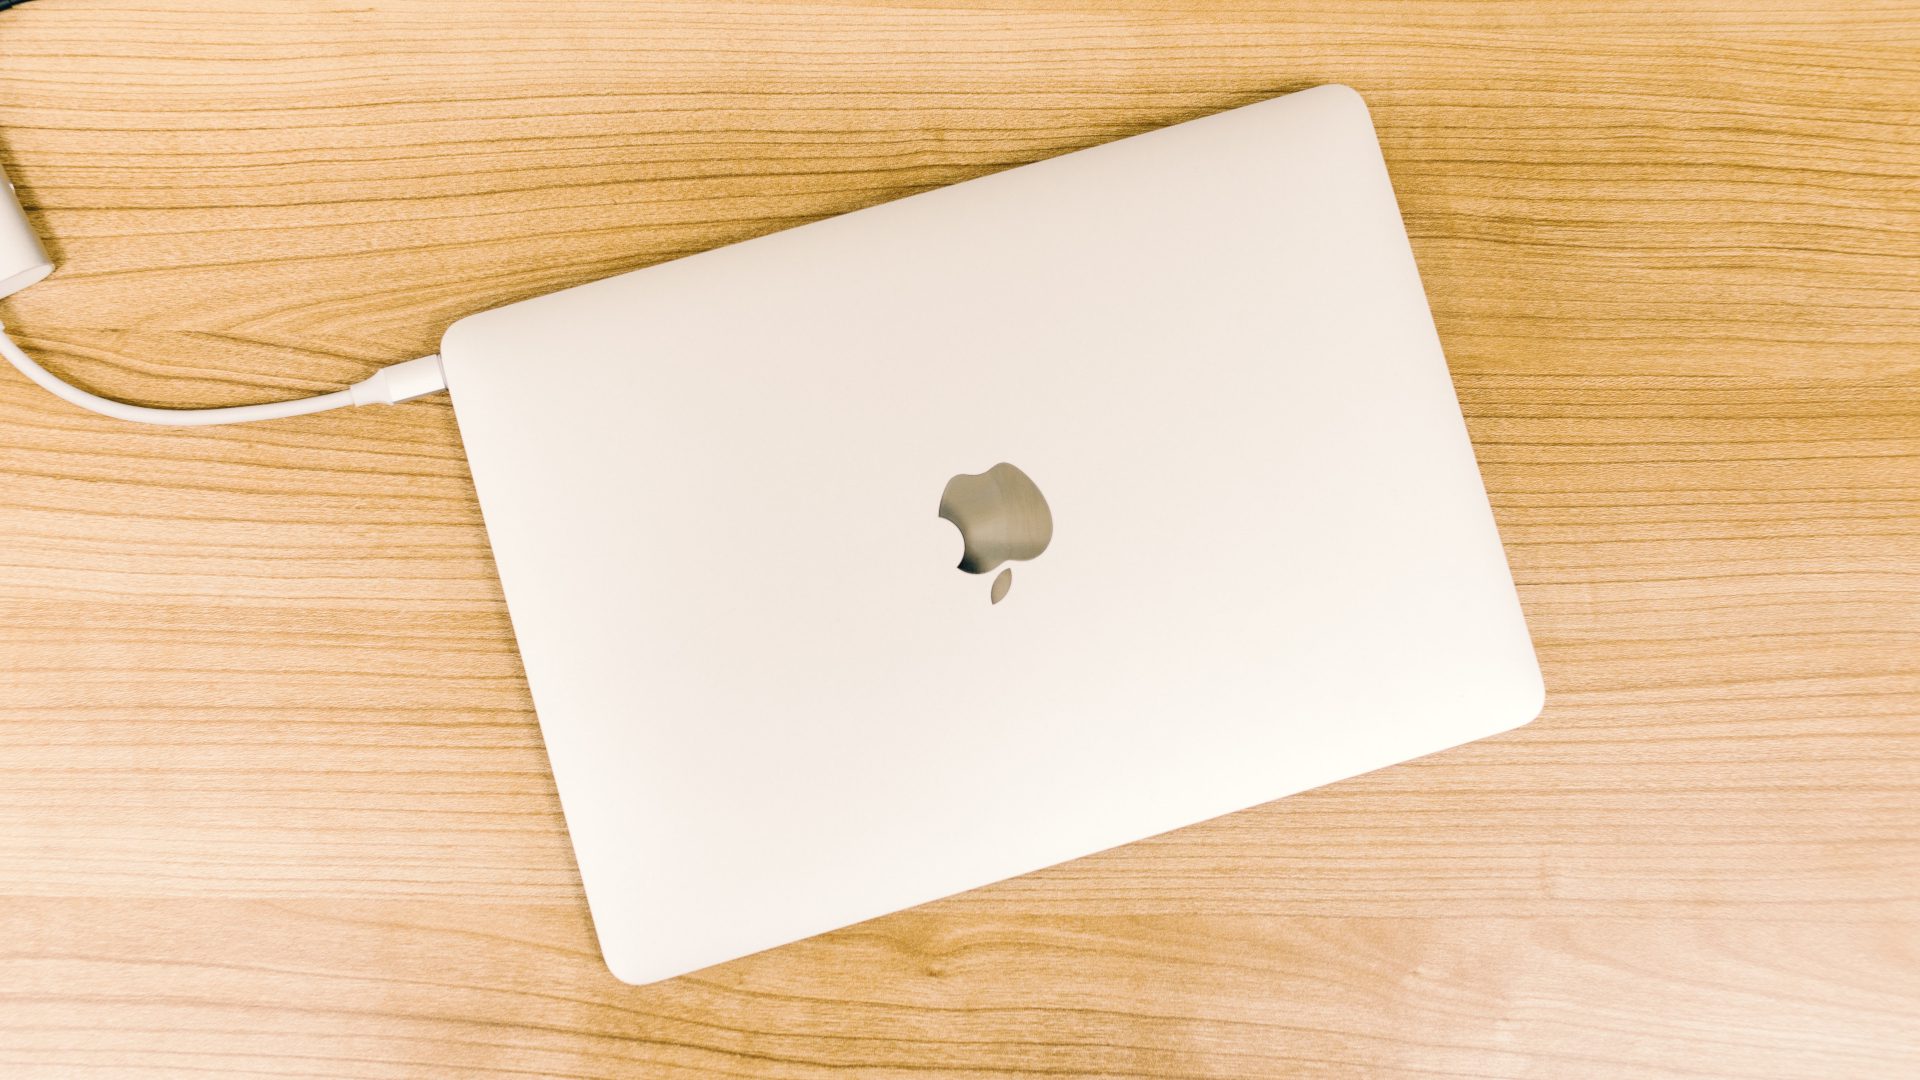 How To Prevent A MacBook From Sleeping When Lid Is Closed